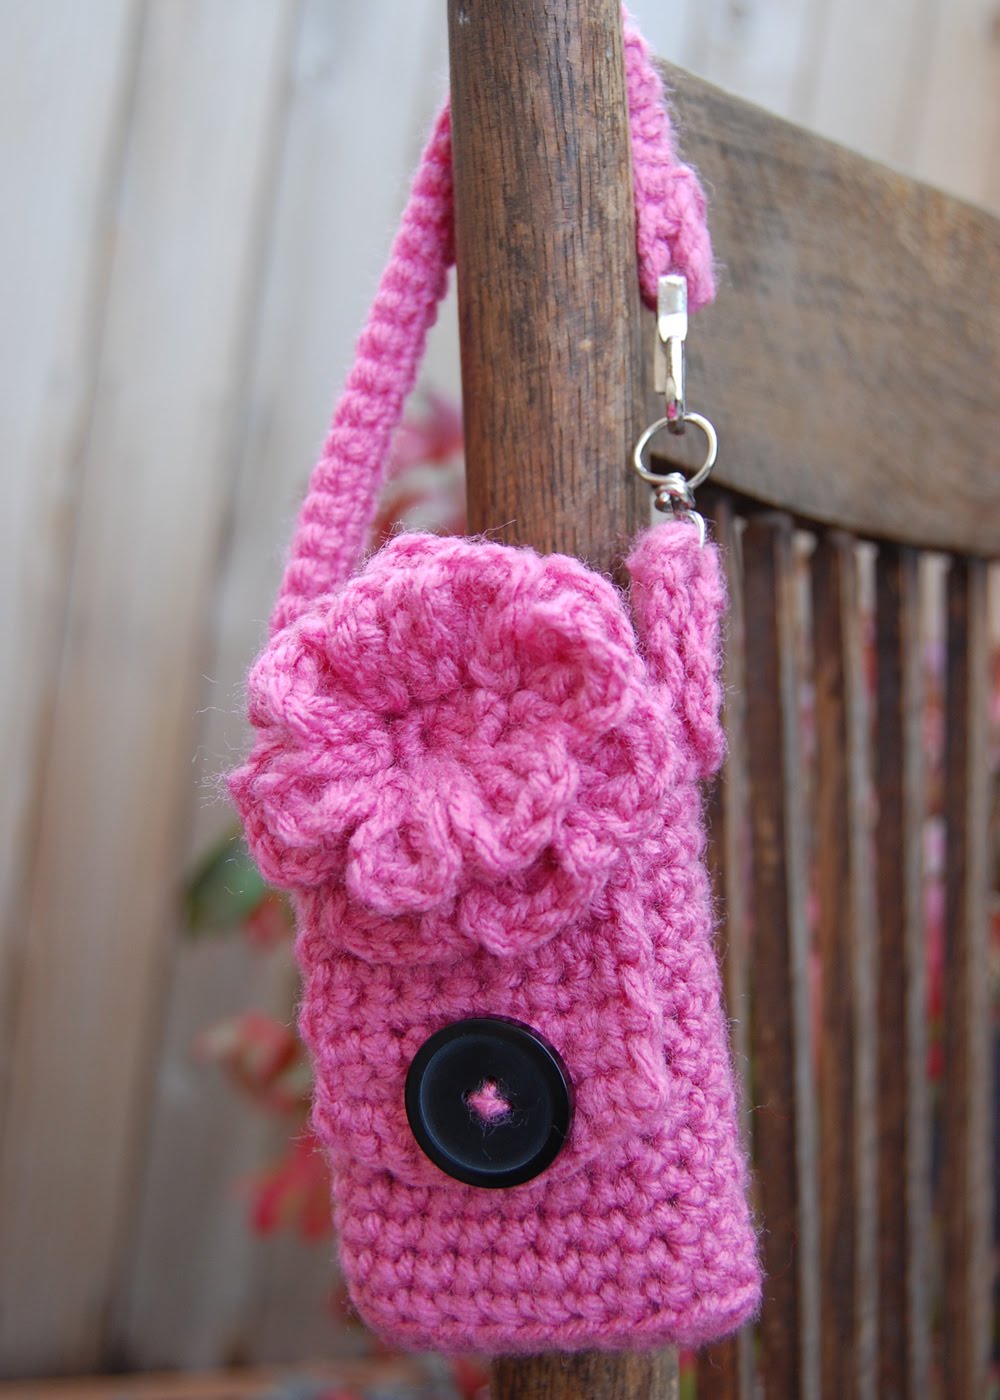 Cell Phone Favorites Pattern * Cell Phone Favorite Pattern by